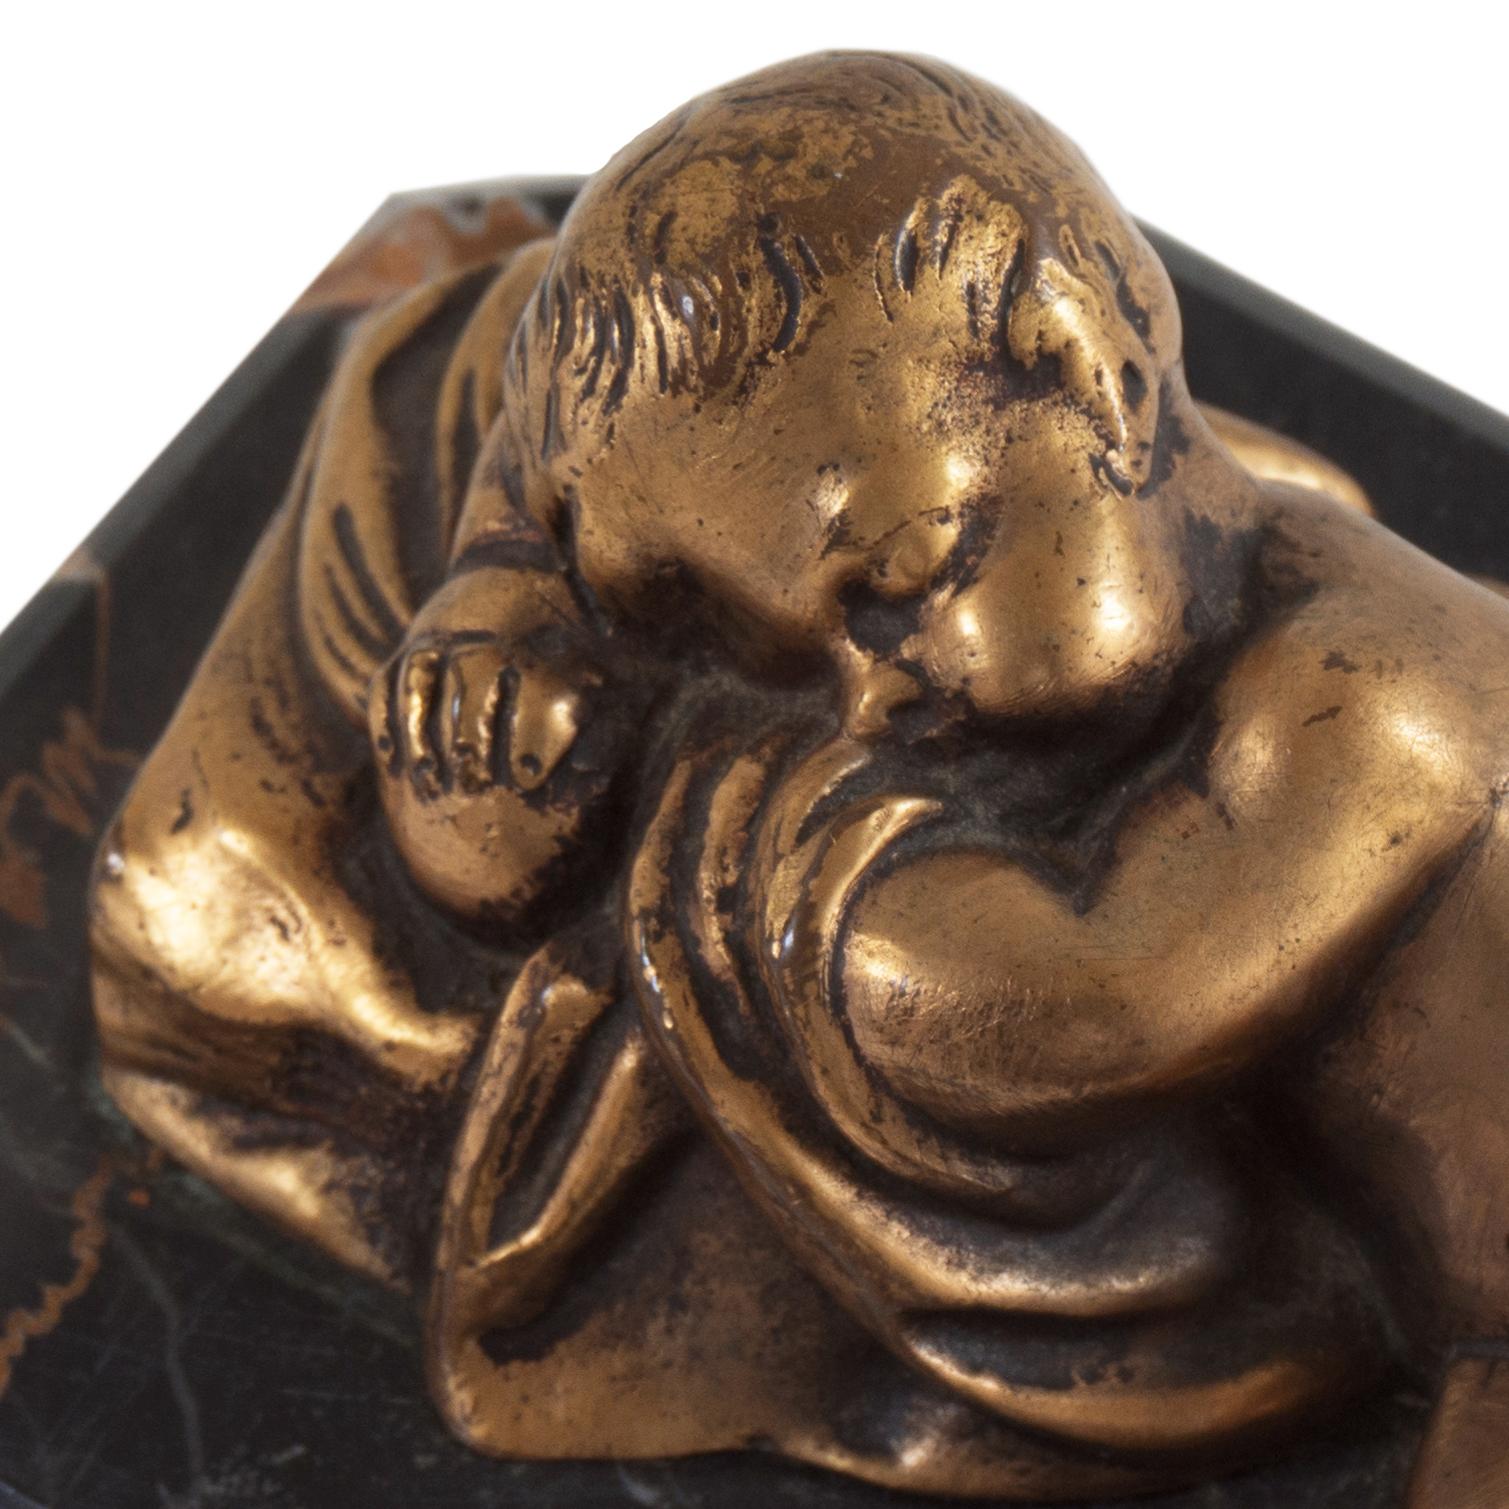 A finely modeled, gilt bronze figural statue of a sleeping cherub shown reclining and asleep with his head resting on a folded blanket. Mounted on the original, chamfered Portoro marble base. French School circa 1900, indistinctly signed in casting.